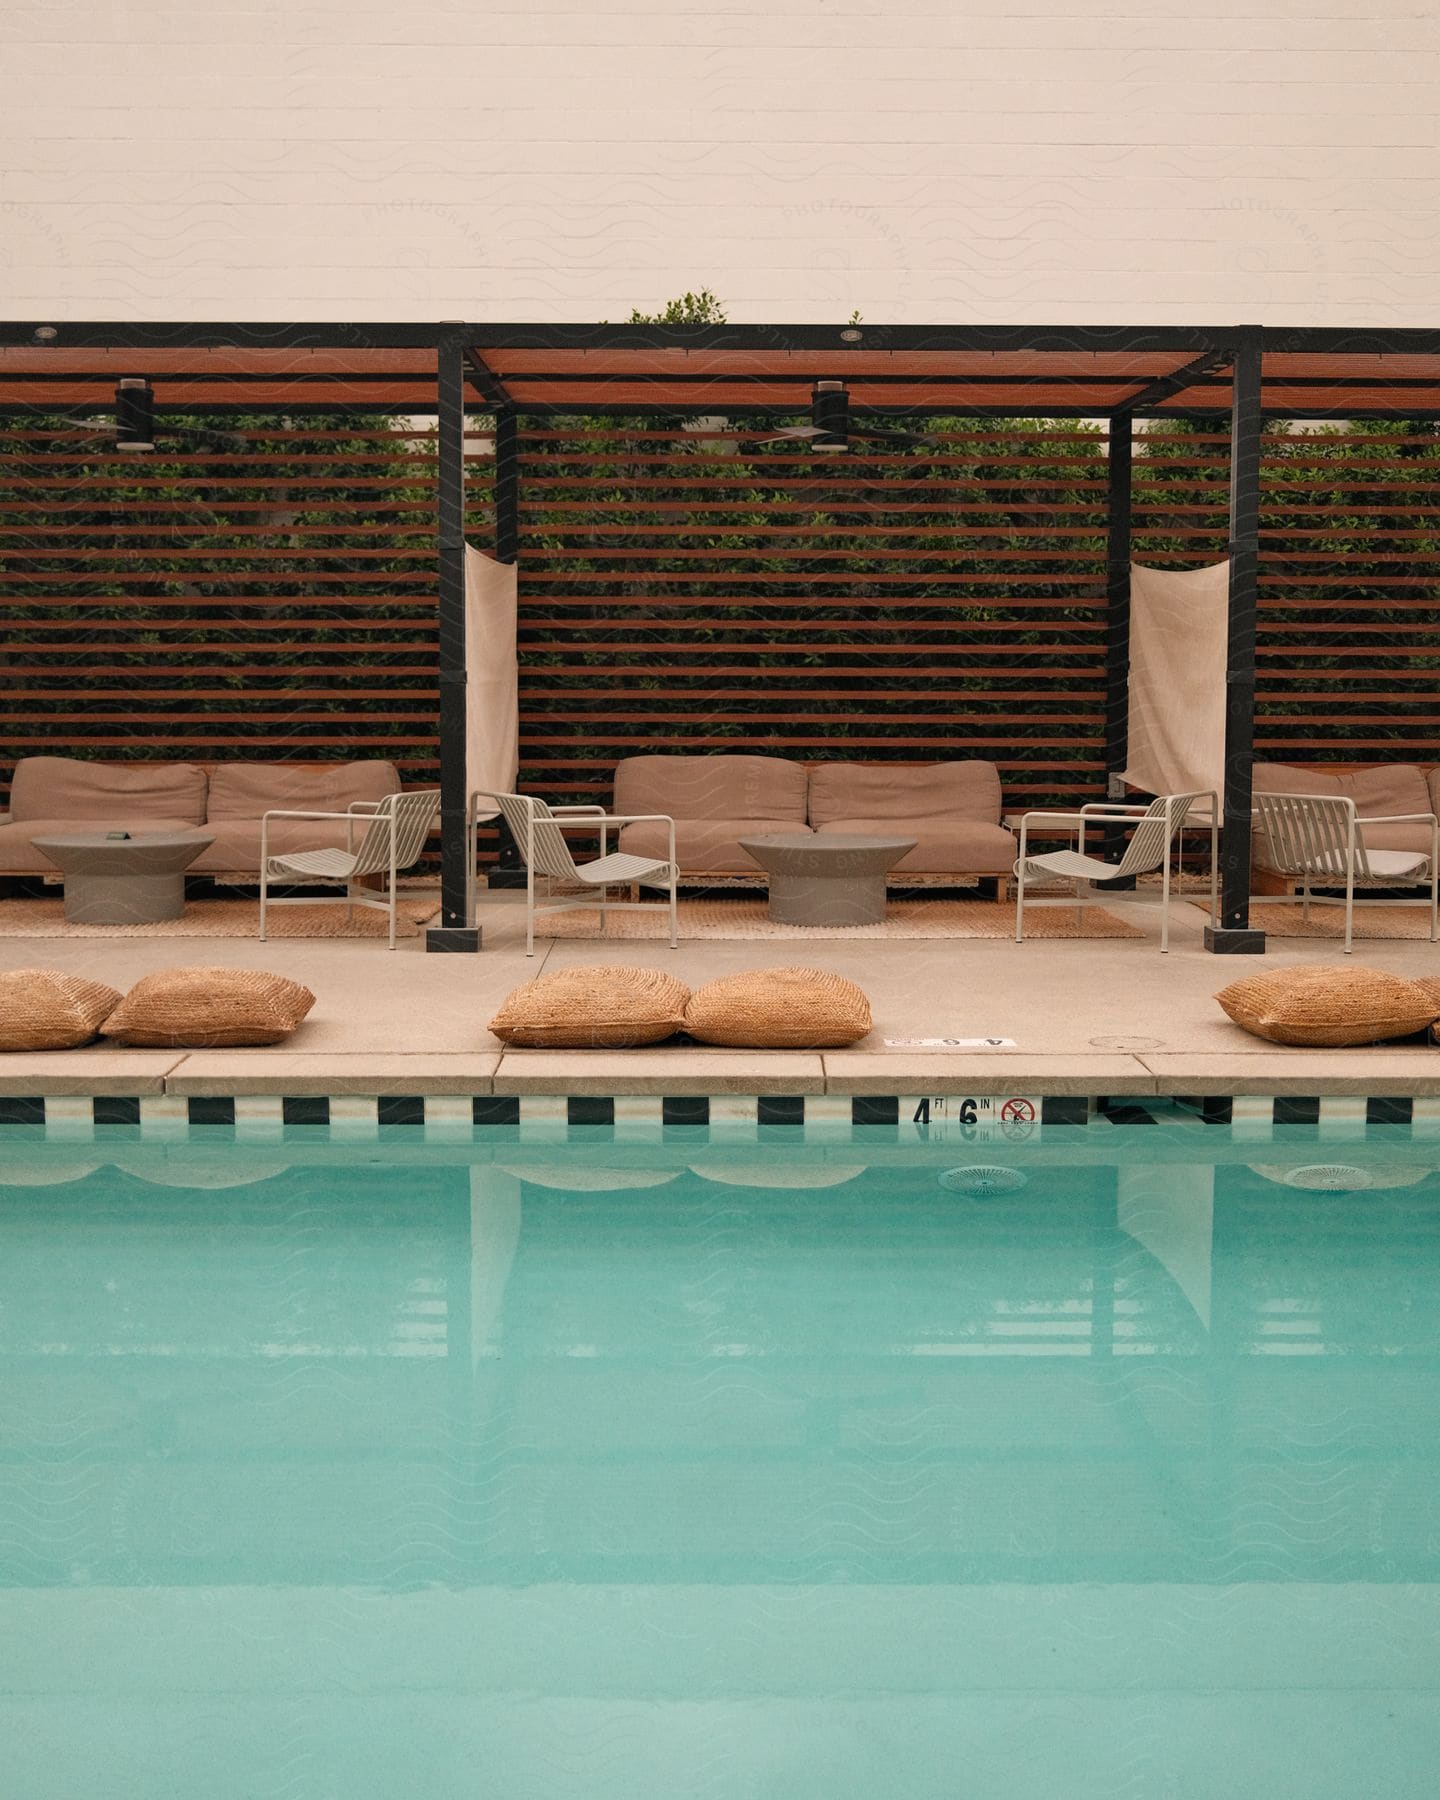 a swimming pool with a pergola casting shade over a lounge area on the patio behind it.